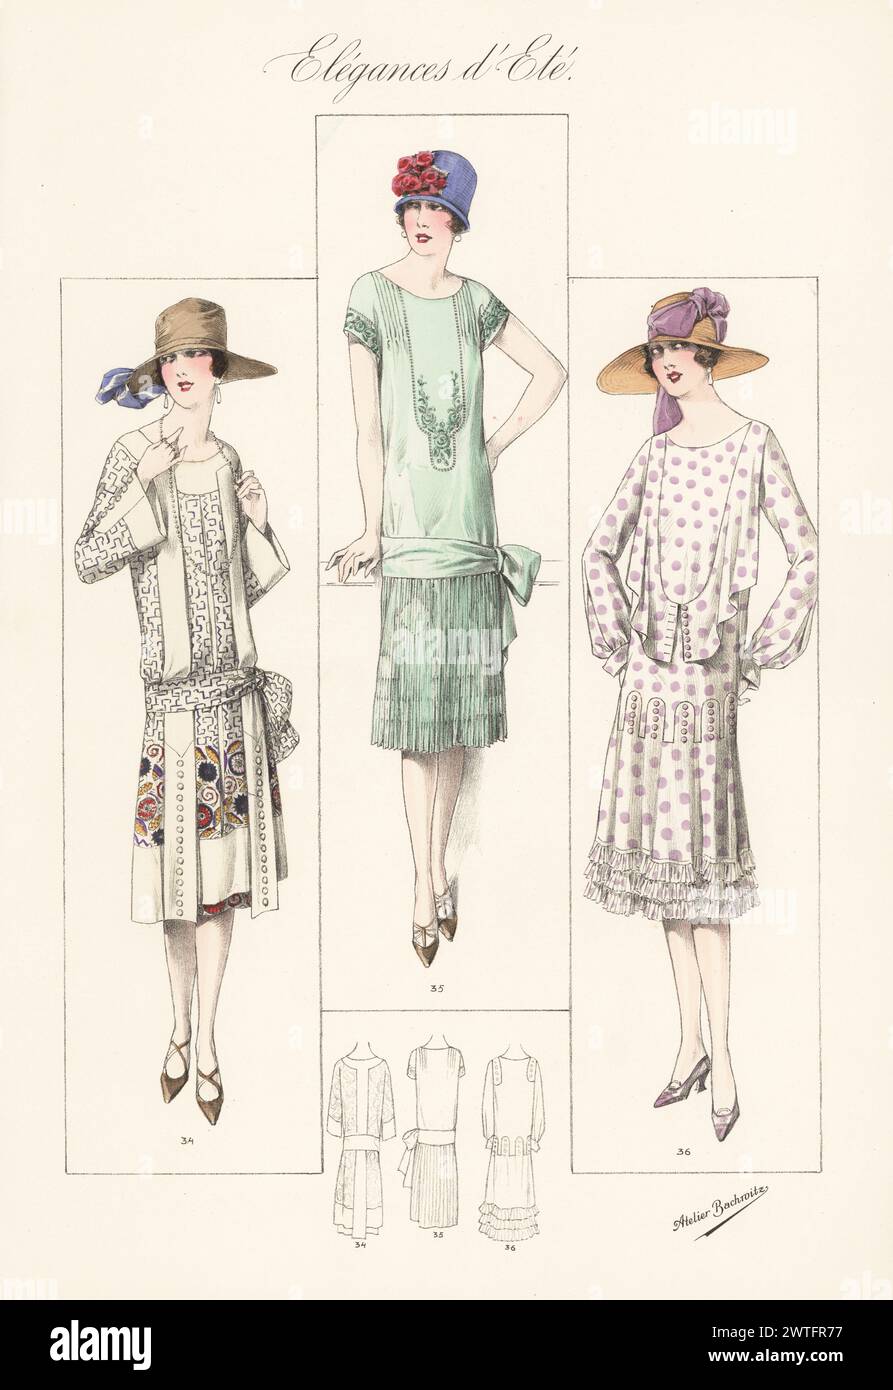 Flappers in summer hats and dresses. Frock in printed foulard 34, crepella frock with coloured embroidery 35, crepe romain dress with draped collar 36 Handcoloured lithograph by Atelier Bachwitz from Modell-Kleider fur den Hochsommer, Elegances d’Ete, Fashions for the Hot Season, Atelier Bachwitz AG, Vienna, 1926. Stock Photo